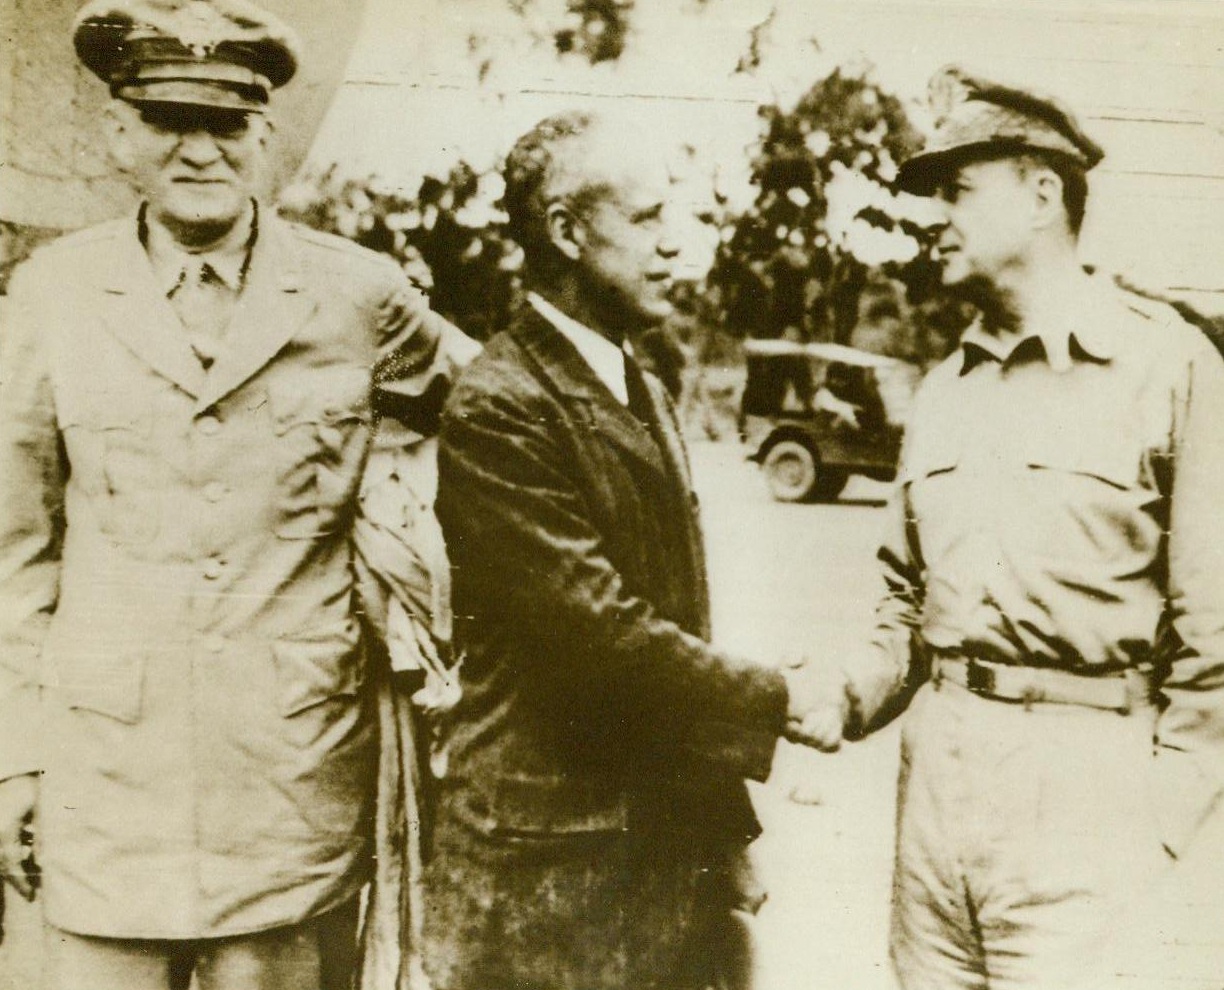 Welcome To New Guinea, 9/2/1943. New Guinea—General Douglas MacArthur (Right) greets Under-Secretary of War Robert L. Patterson (Center) and Lieut. Gen. William S. Knudsen, at his headquarters somewhere in New Guinea. That South Pacific Island is now the scene of some furious war action as our forces close in on Japs entrenched at Salamaua. 9/2/43 (ACME);